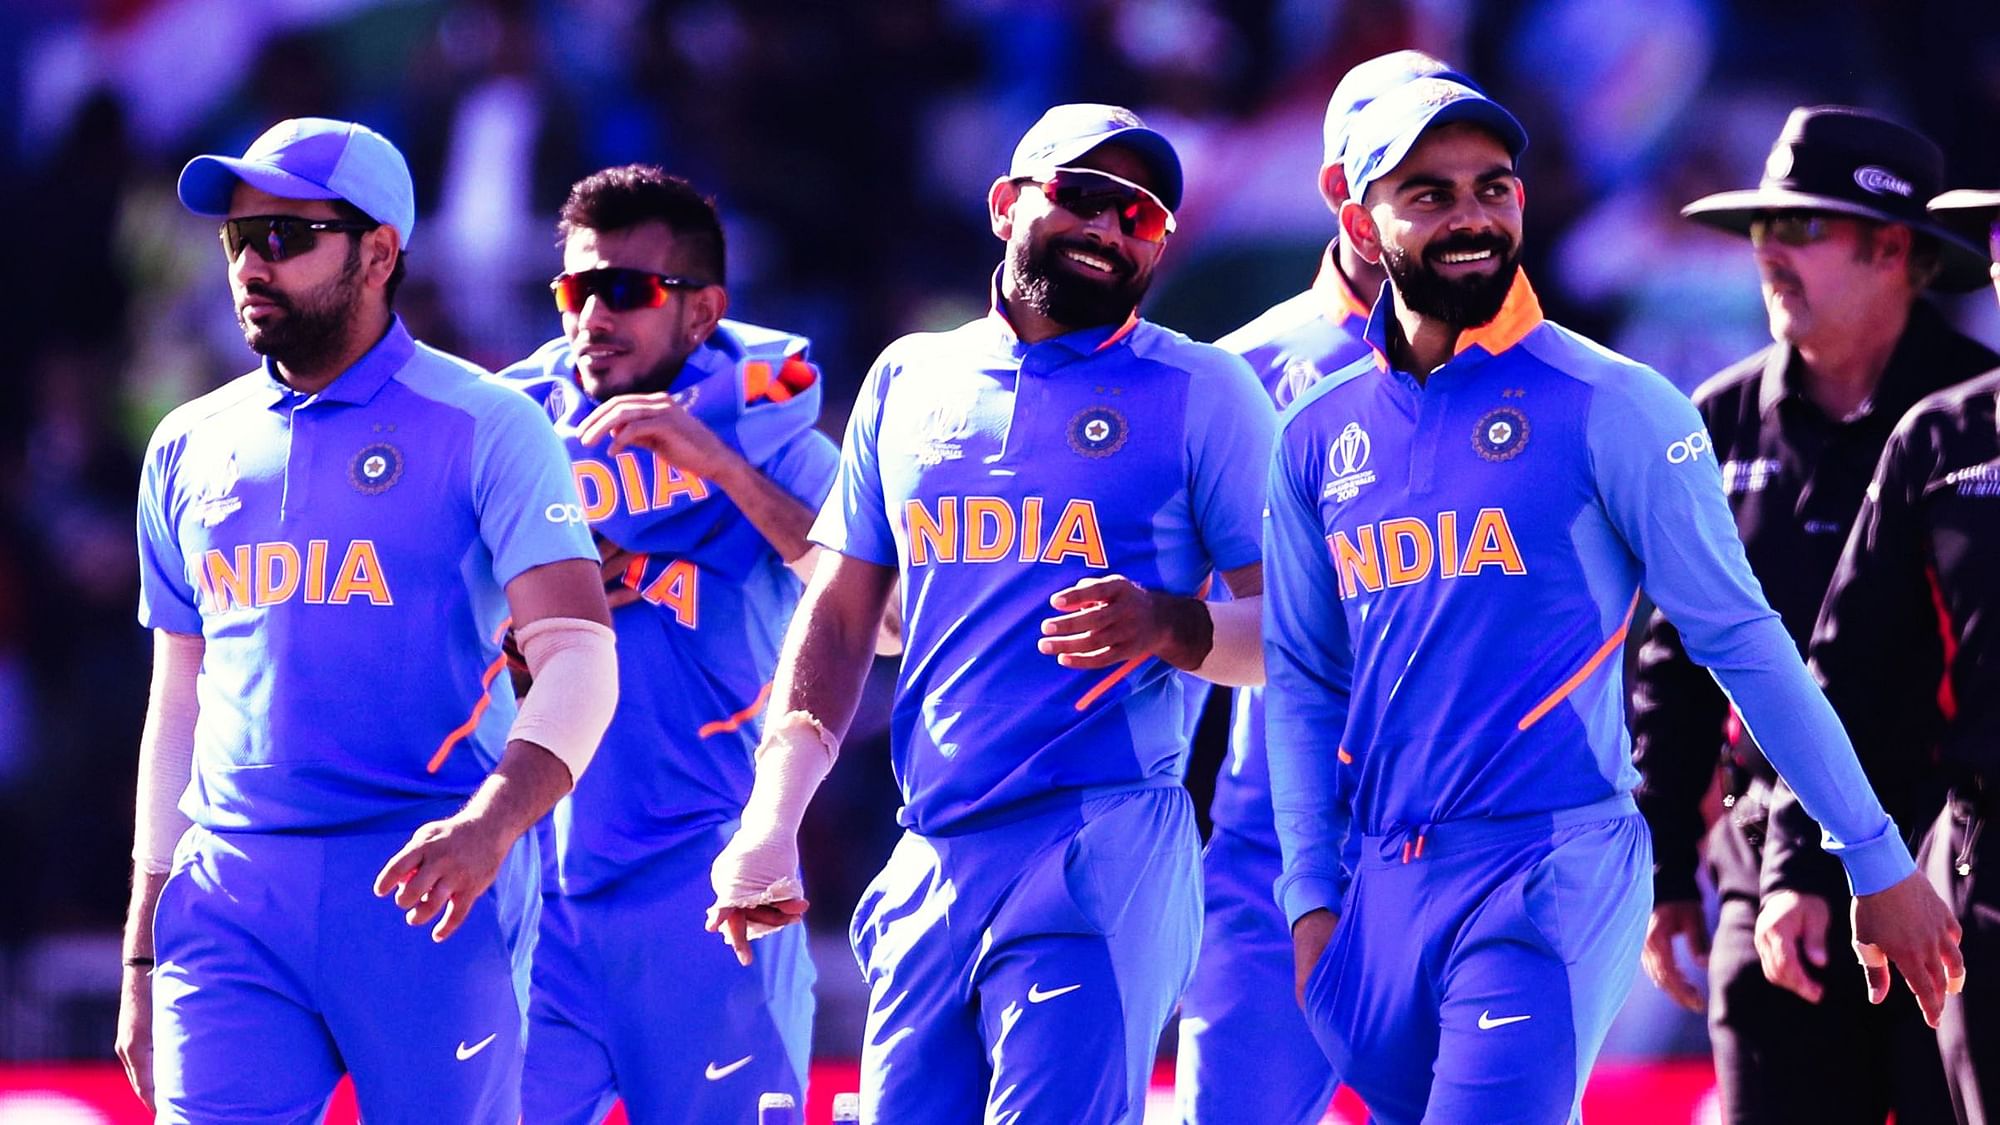 Hosts England will take on Team India in one of the most important clashes of World Cup 2019.